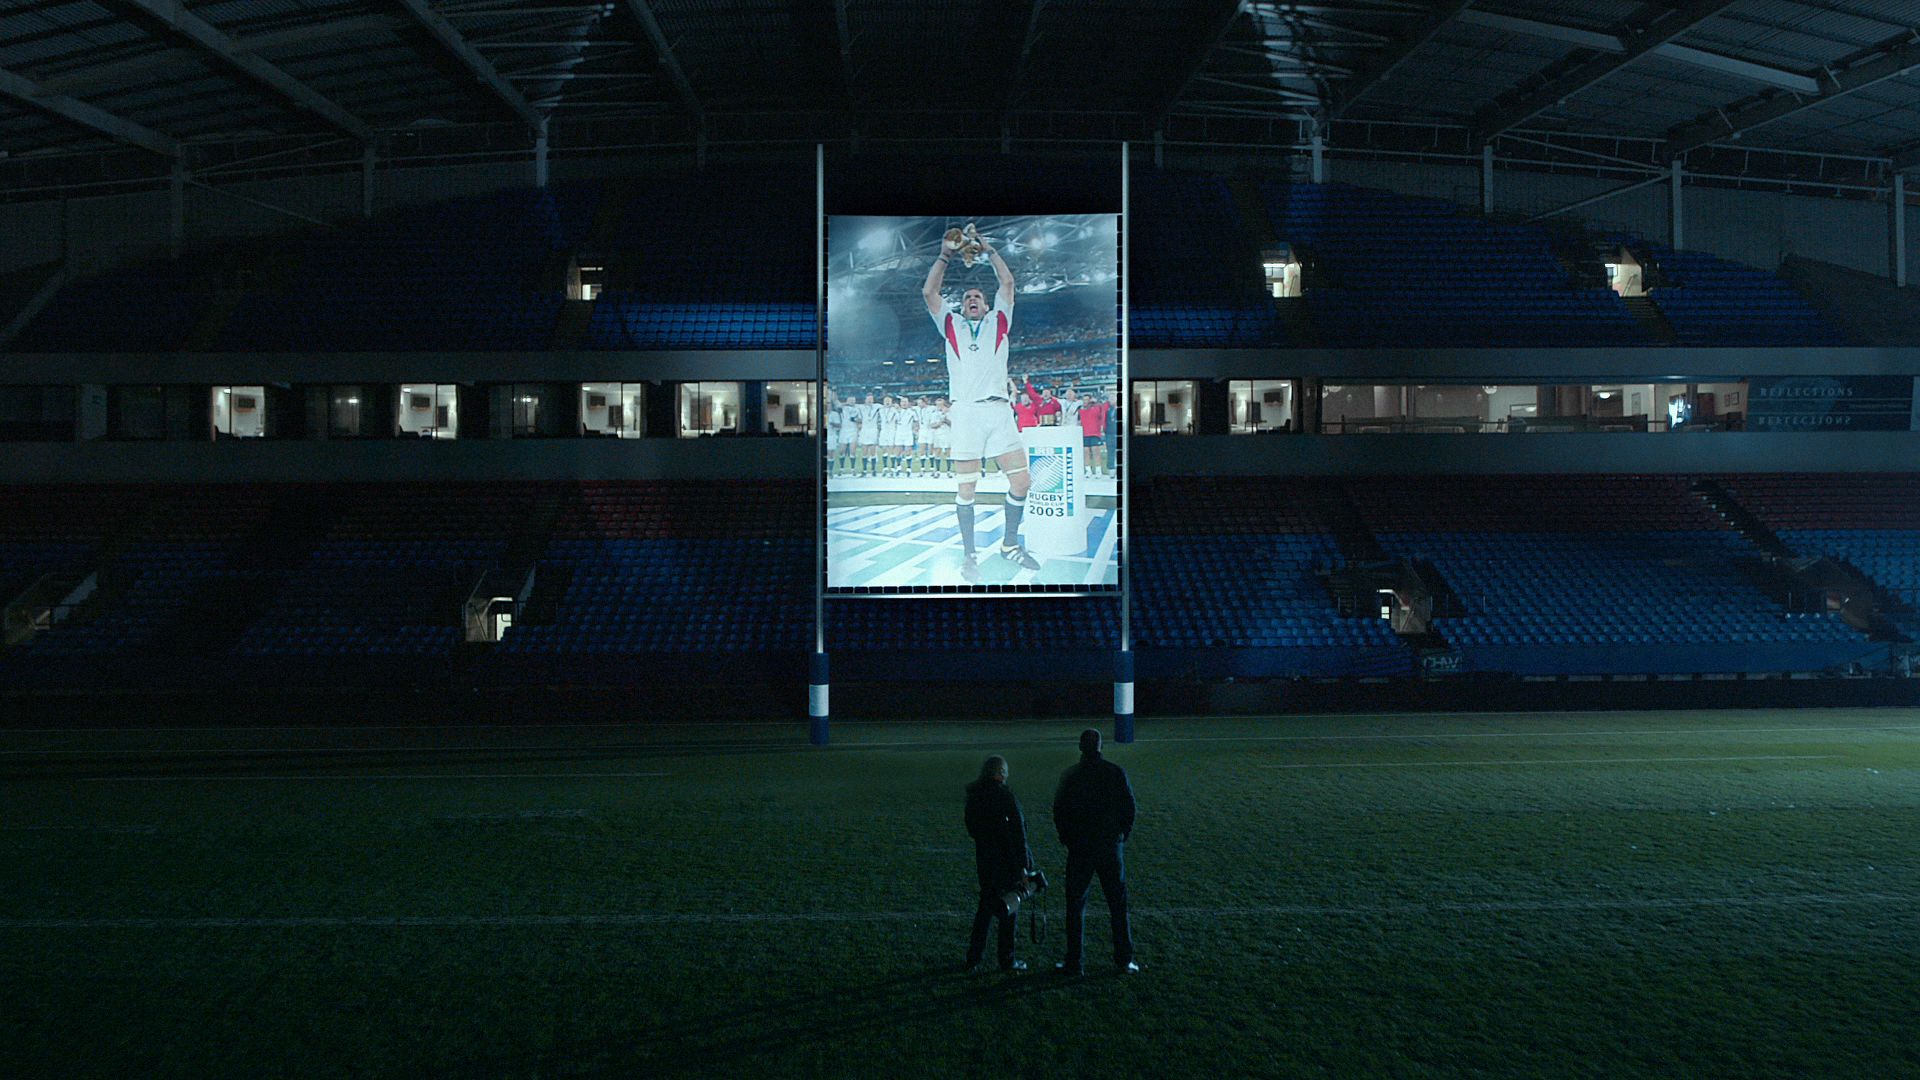 VCCP Demonstrates Canon’s Iconic Sporting Moments in Rugby World Cup Campaign